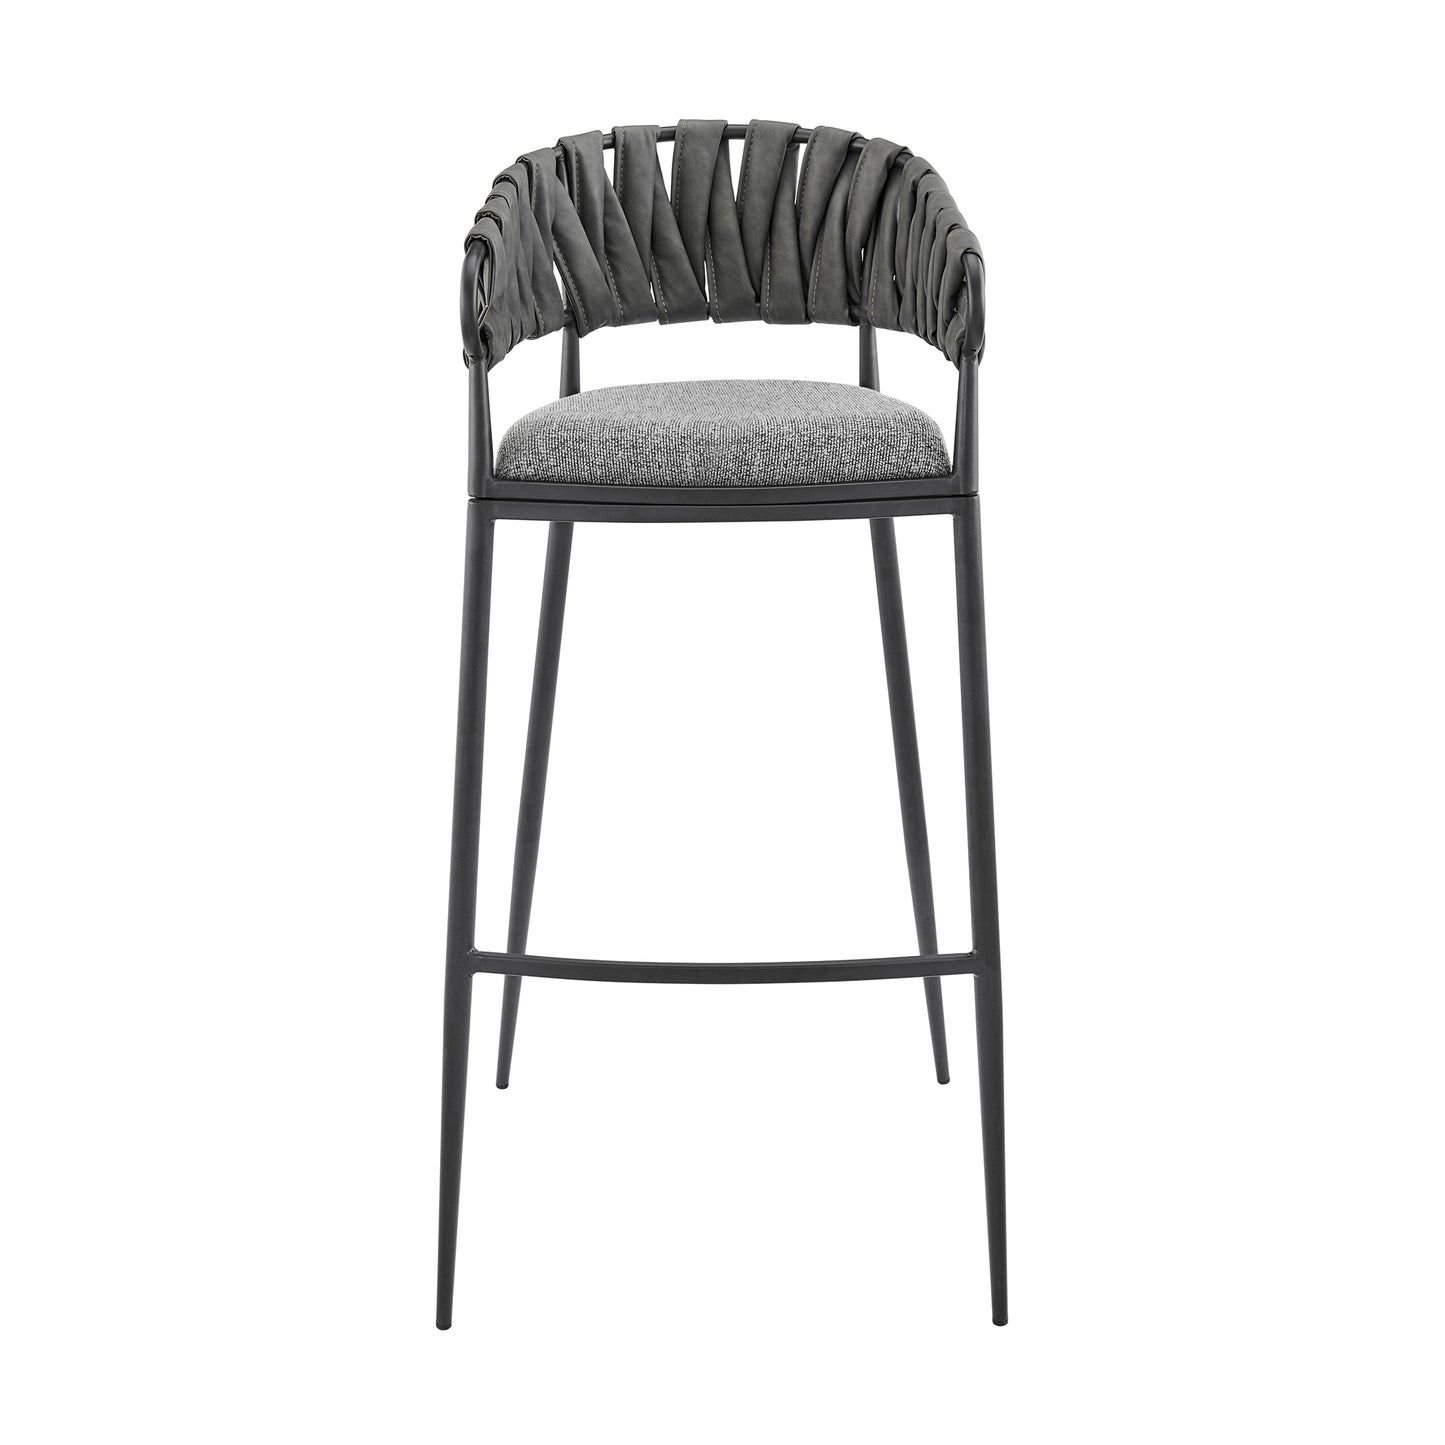 Giovanni 30" Bar Stool in Black Metal with Gray Fabric and Faux Leather